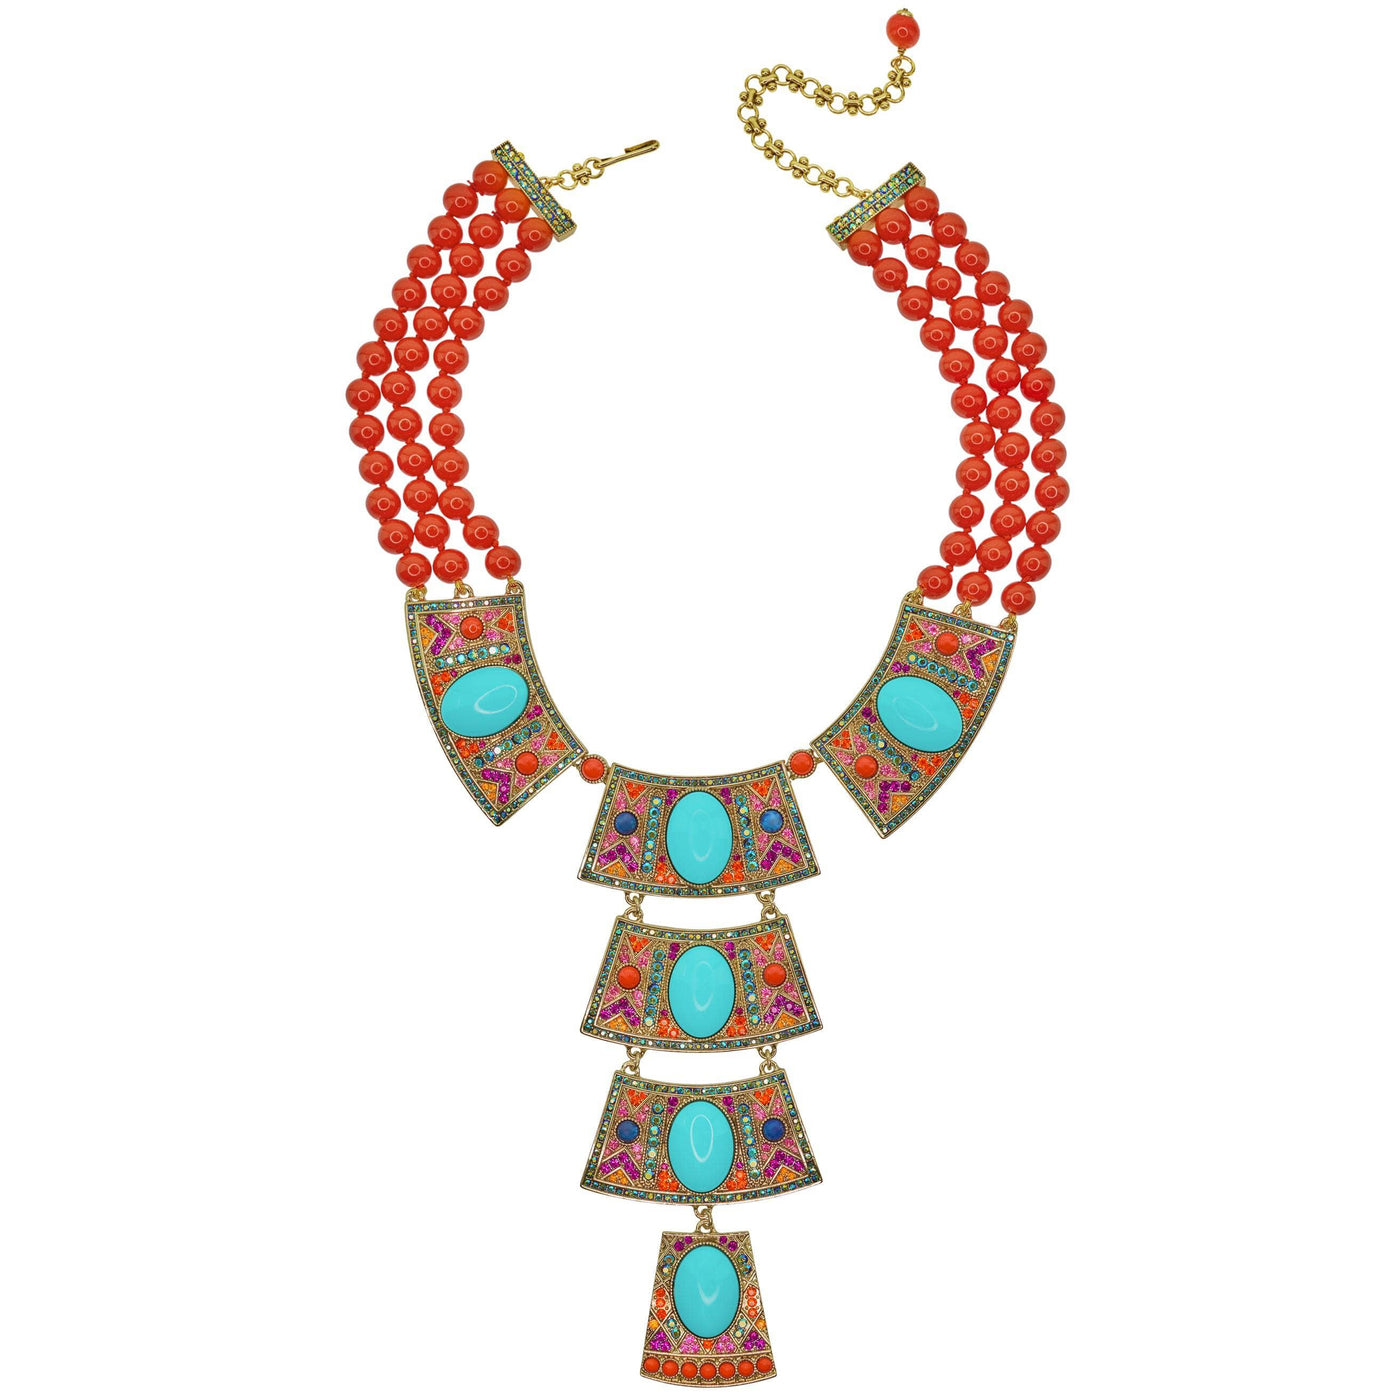 Heidi Daus®"Queen Of The Nile" Beaded Crystal Statement Necklace